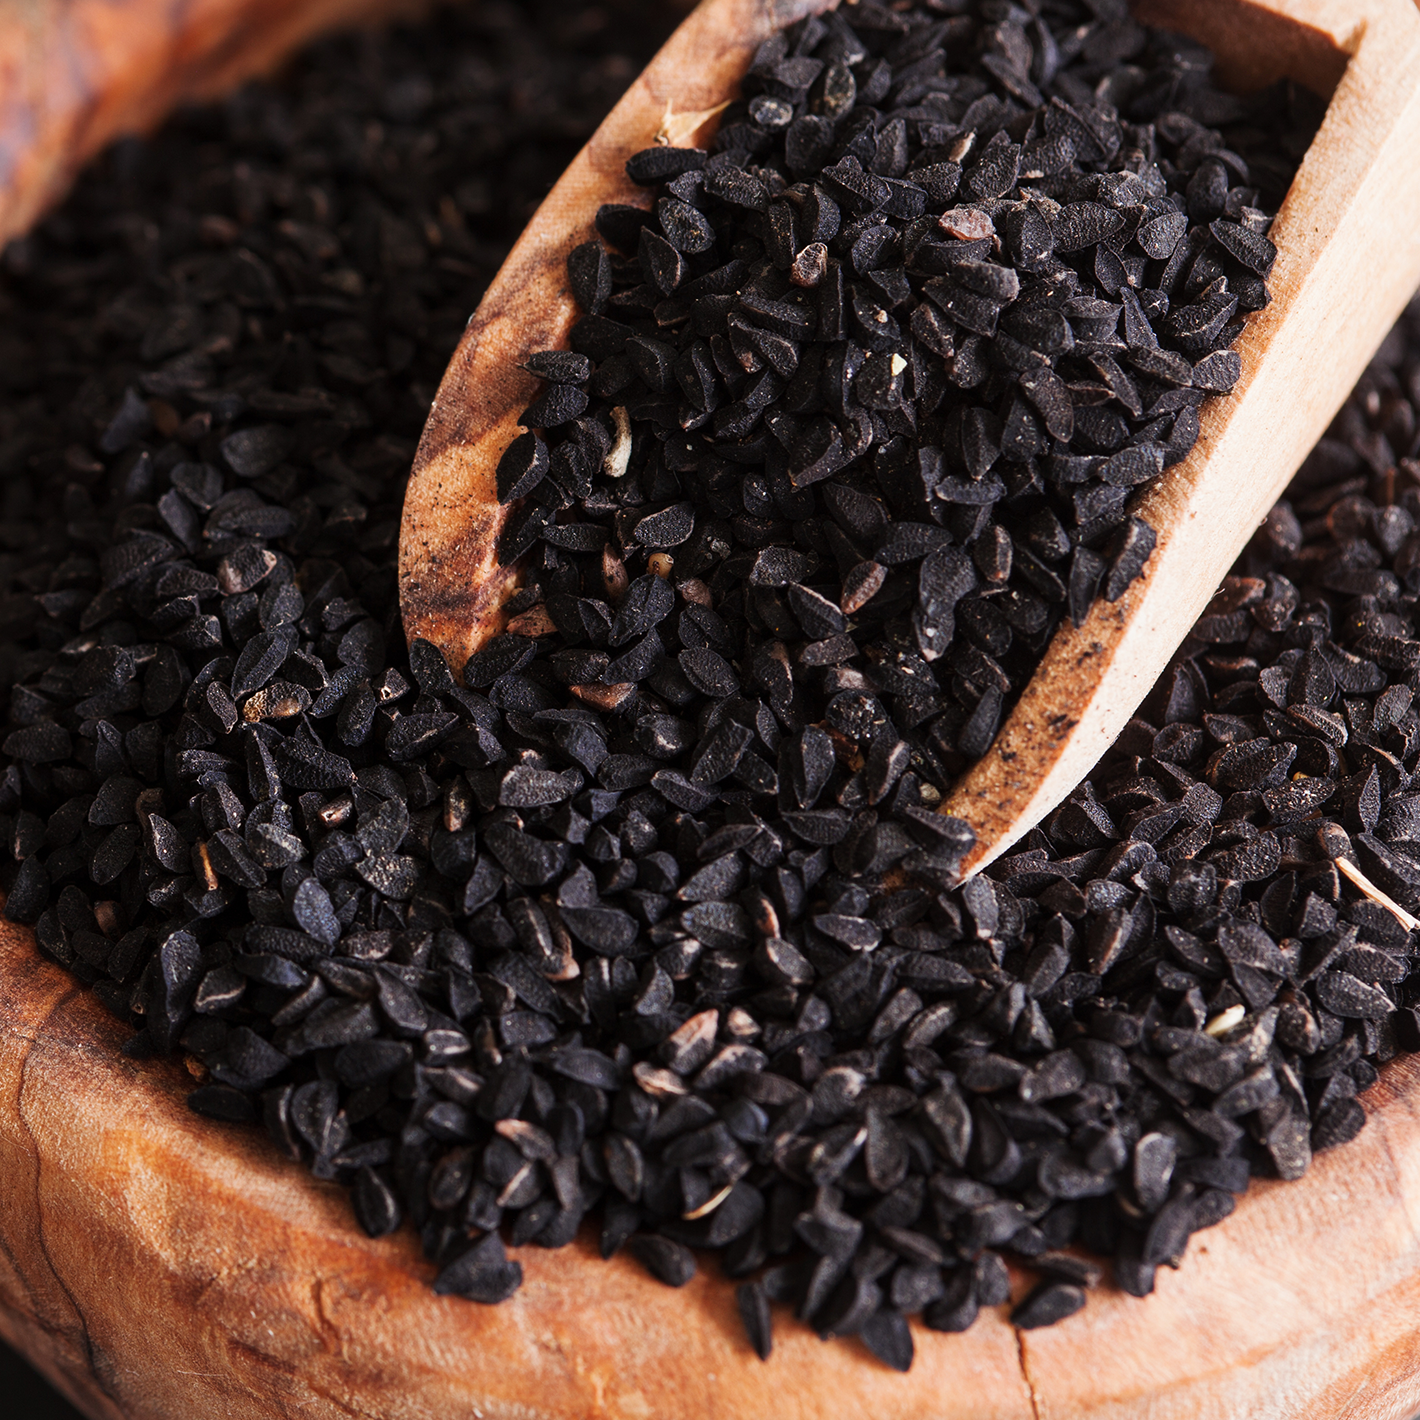 Black Cumin seeds in a bowl with a set of tongs to pick them up.